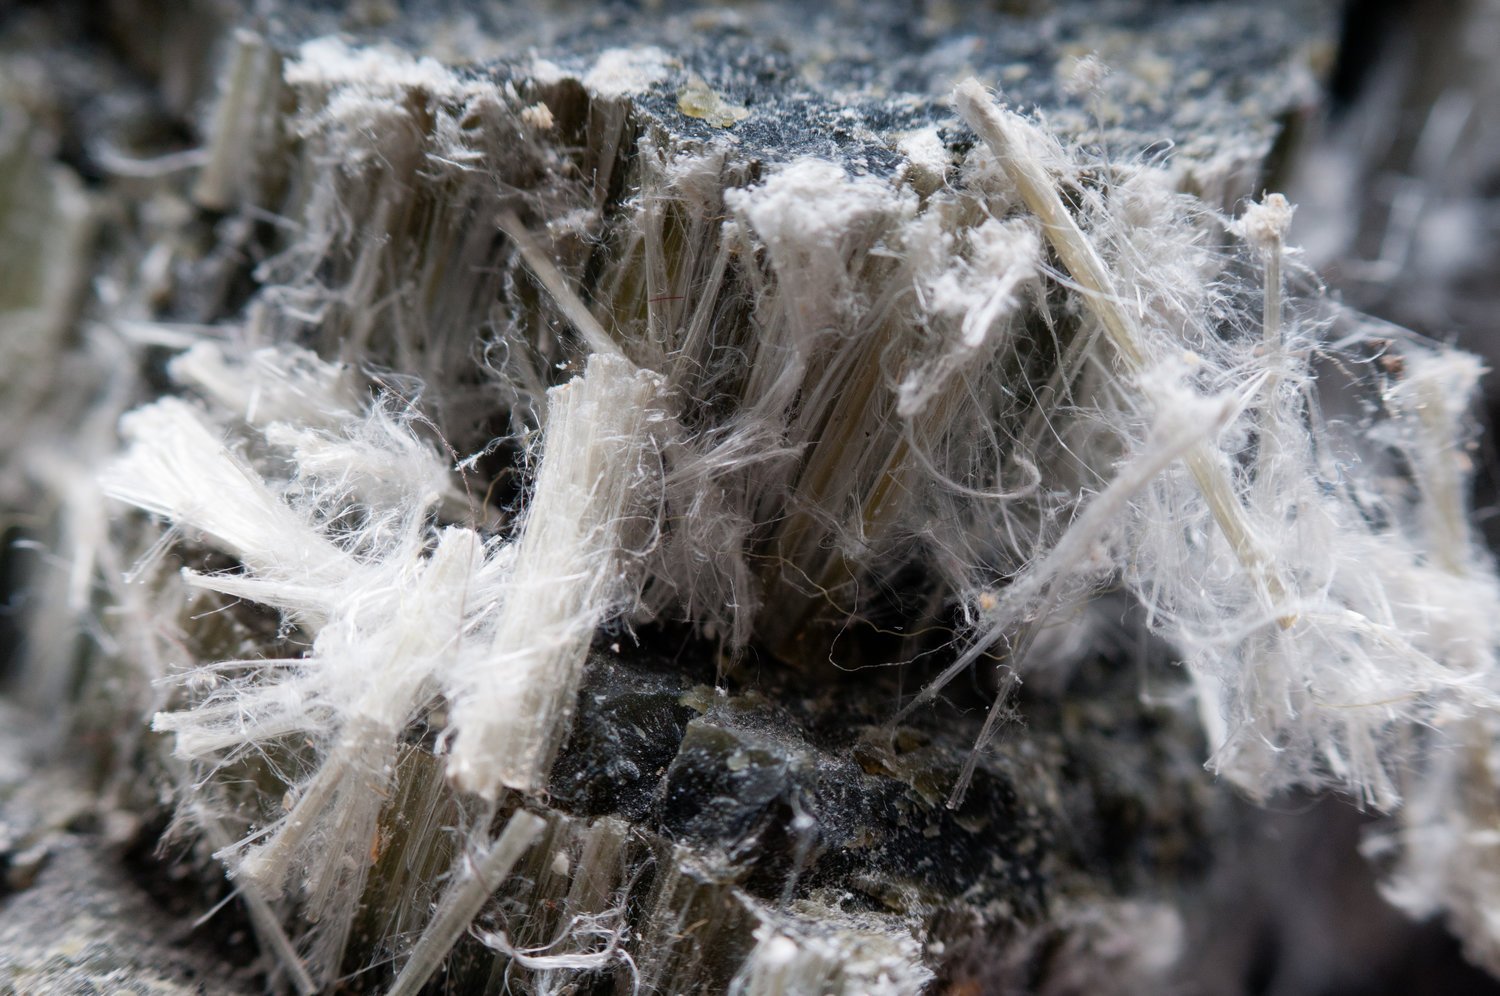 About asbestos